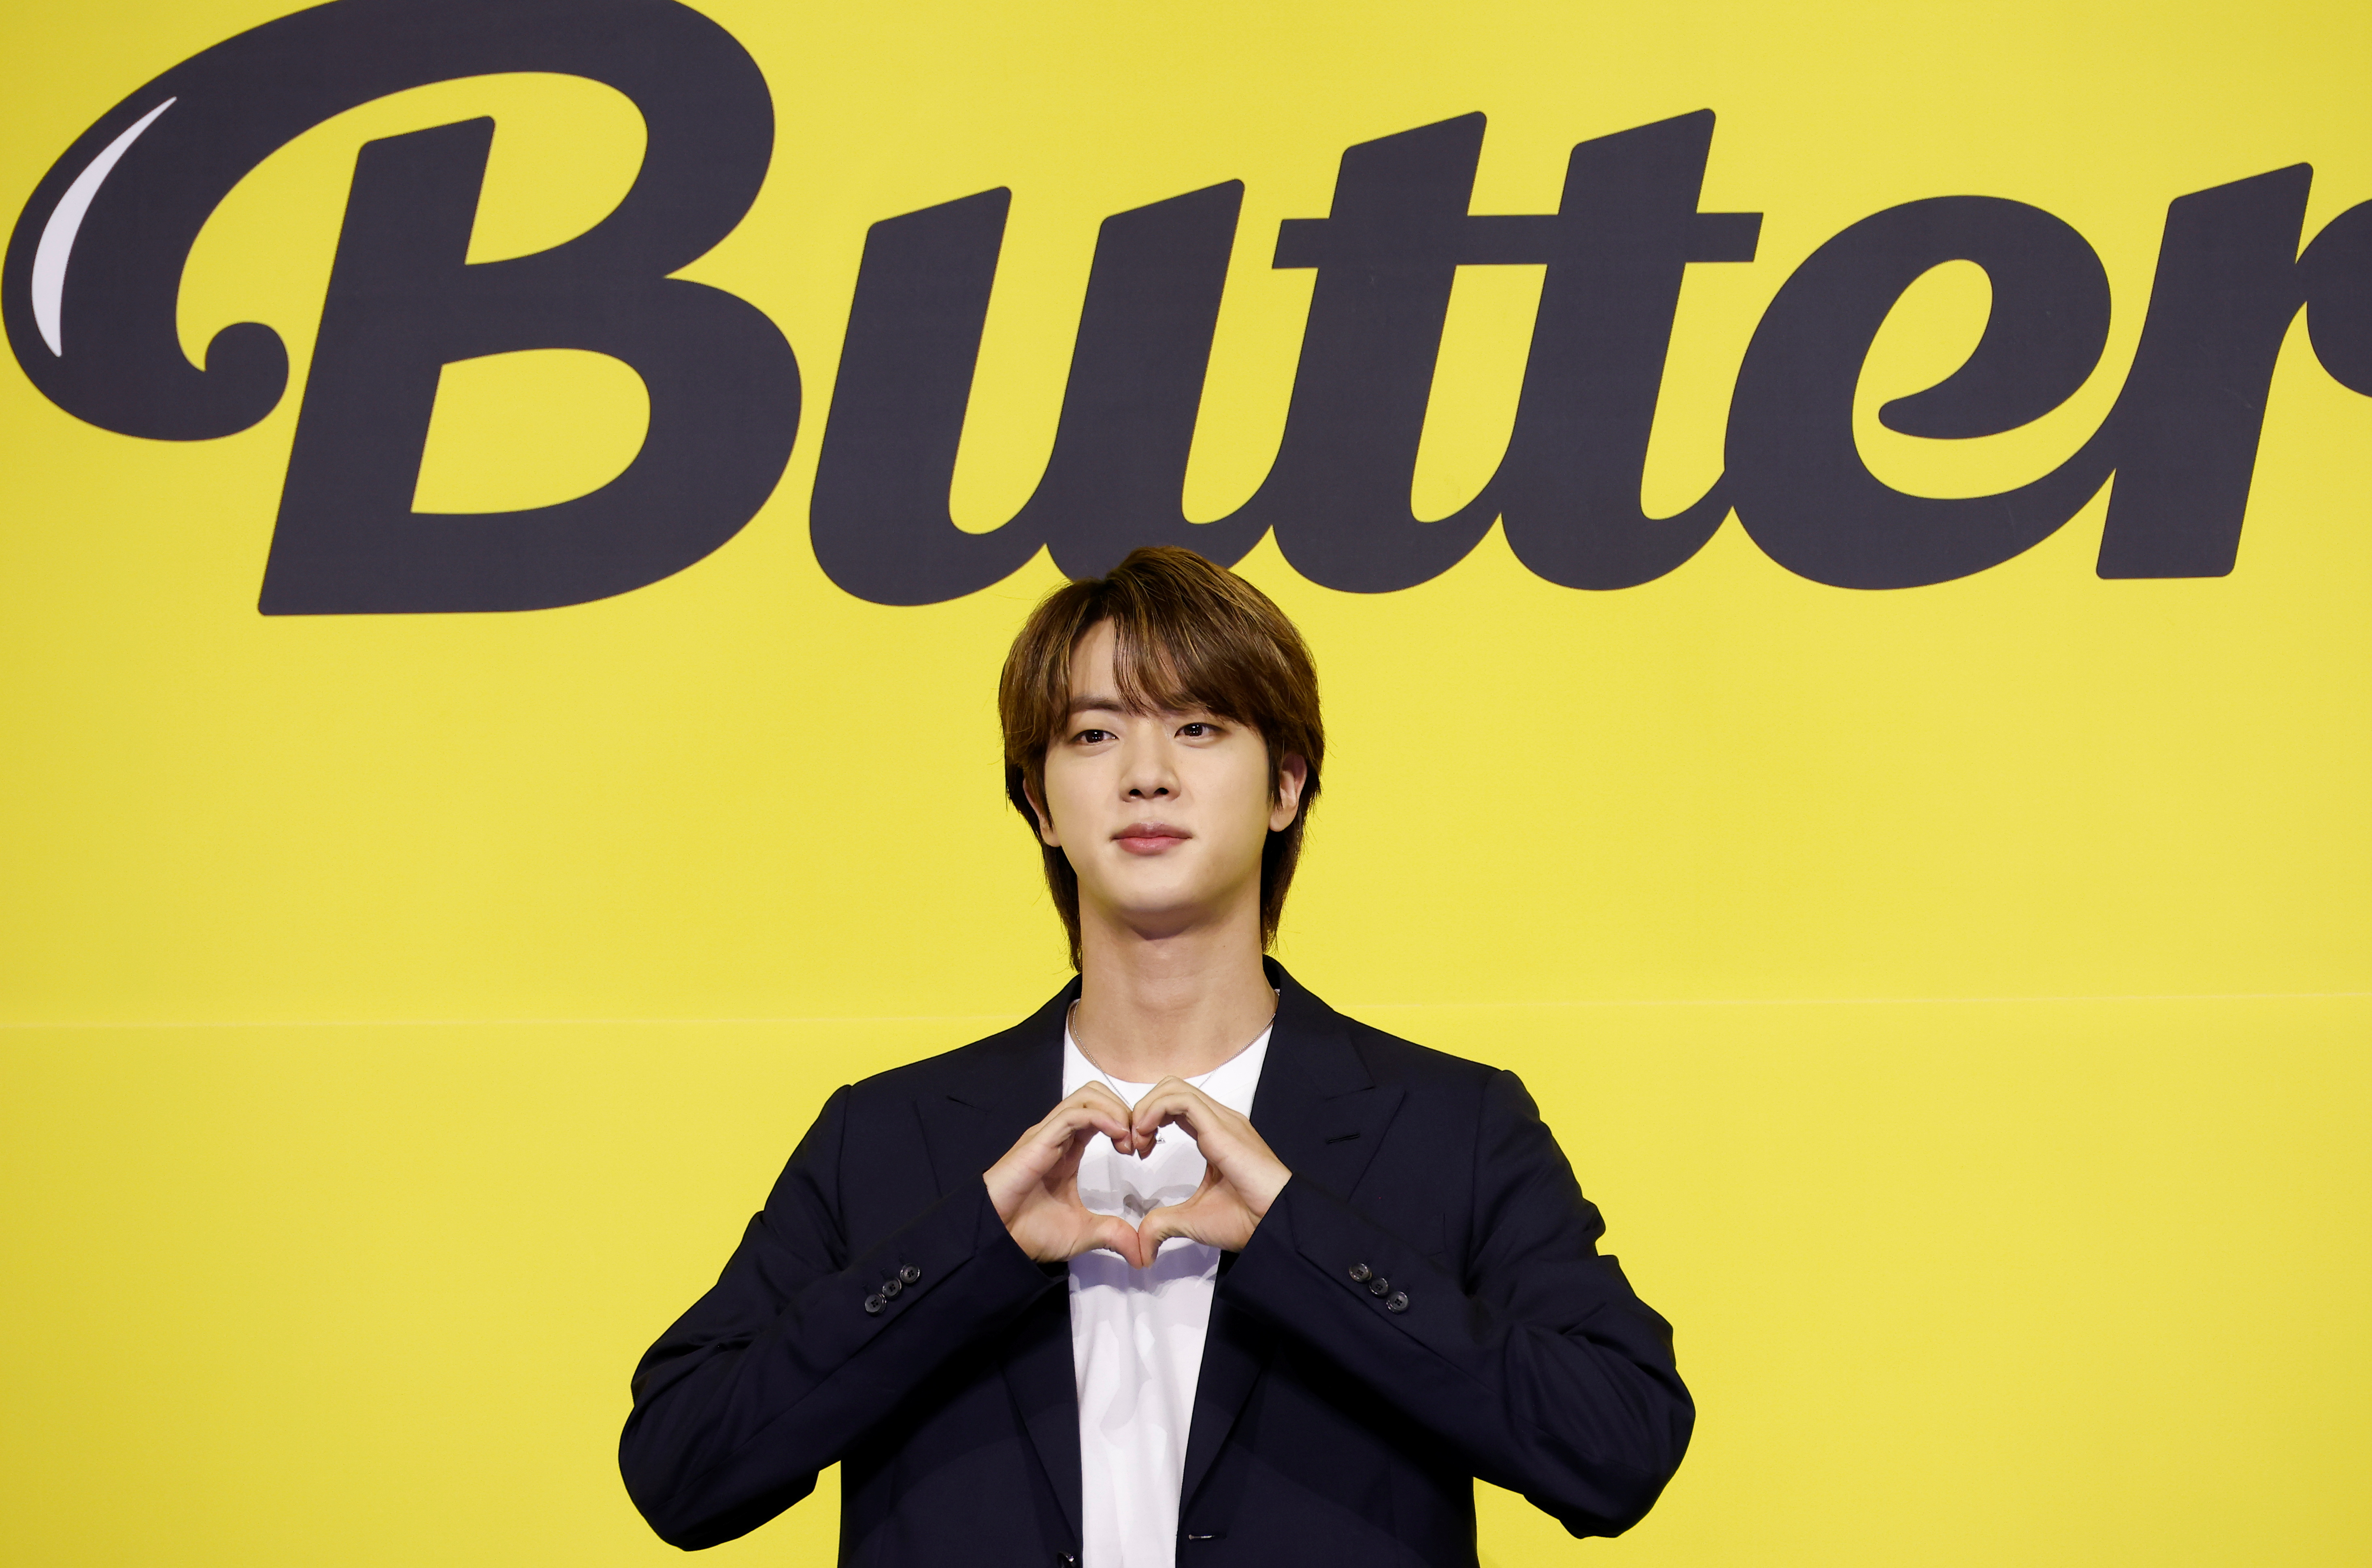 K-pop boy band BTS member Jin poses for photographs during a photo opportunity promoting their new single 'Butter' in Seoul